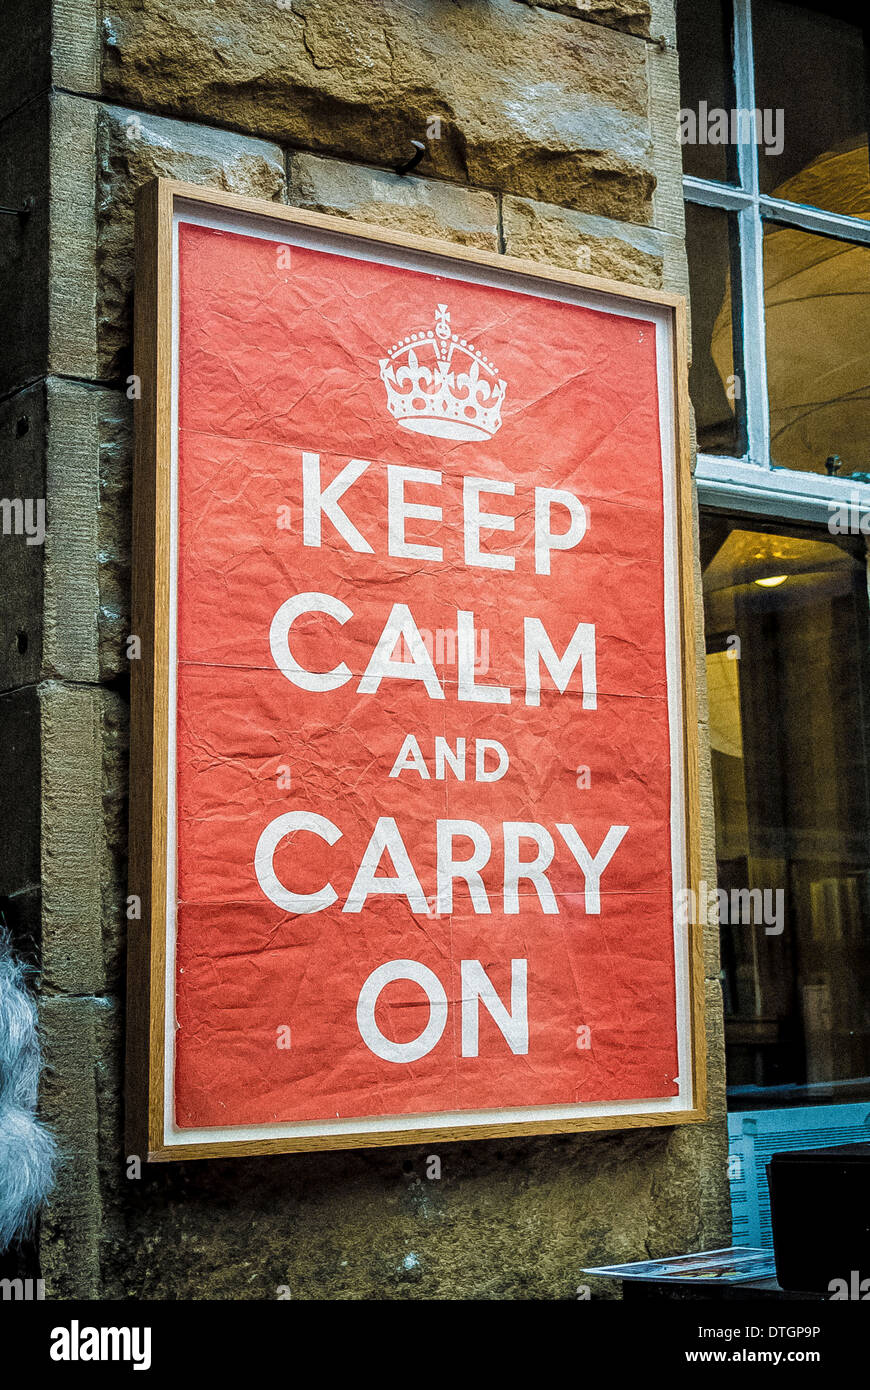 carry on and keep calm